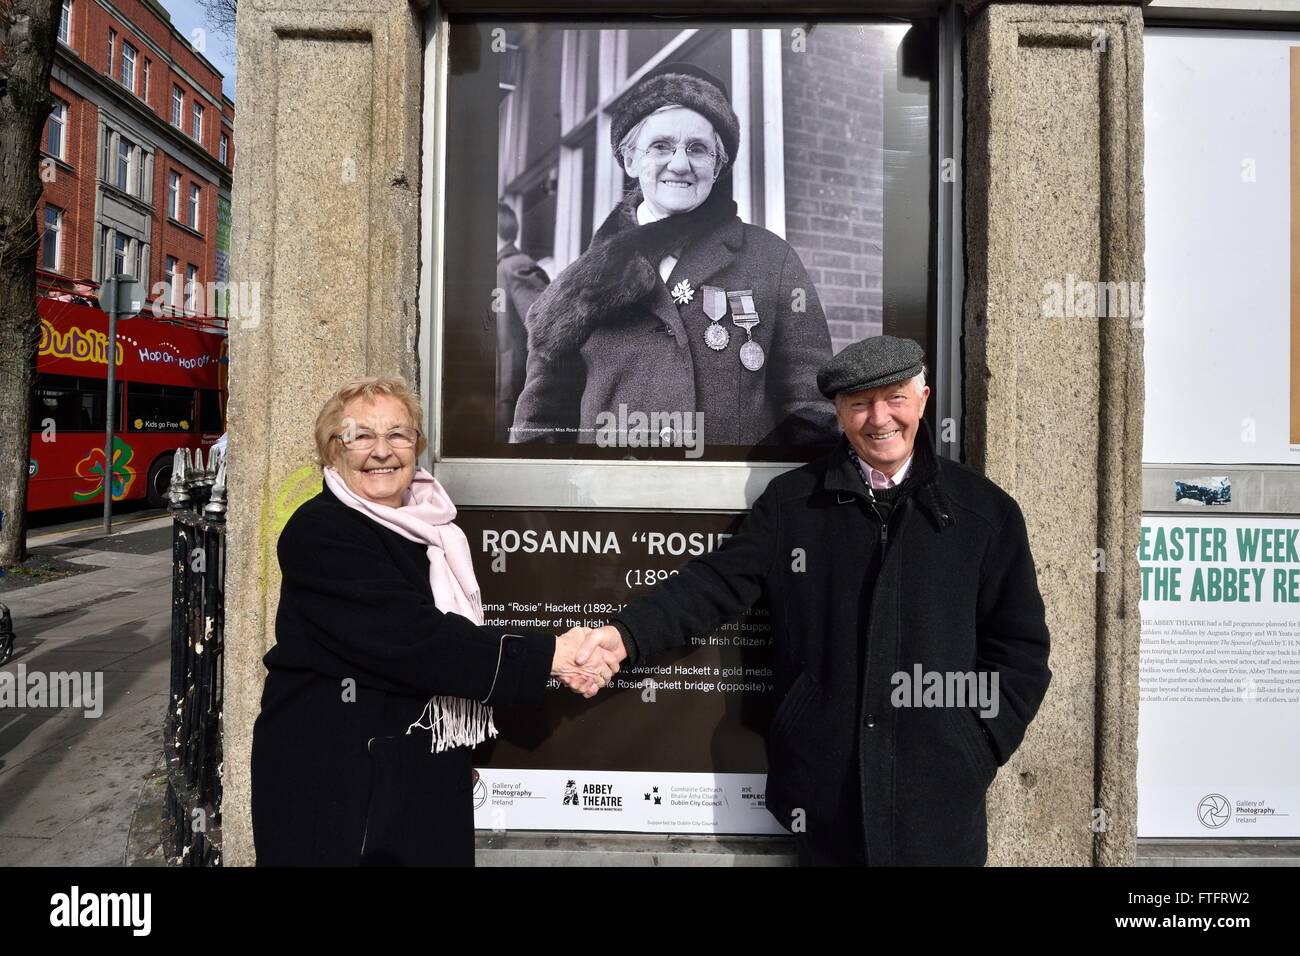 Dublin, Ireland. 28th Mar, 2016. Gerry and Lillian Carroll posing in front of murals that commemorate members of the Abbey Theatre's involvement in the historic 1916 Easter Rising that lay the foundations for a free and independent Irish State on Easter Monday, March 28, 2016, Dublin, Ireland. © Rory Merry/ZUMA Wire/Alamy Live News Stock Photo